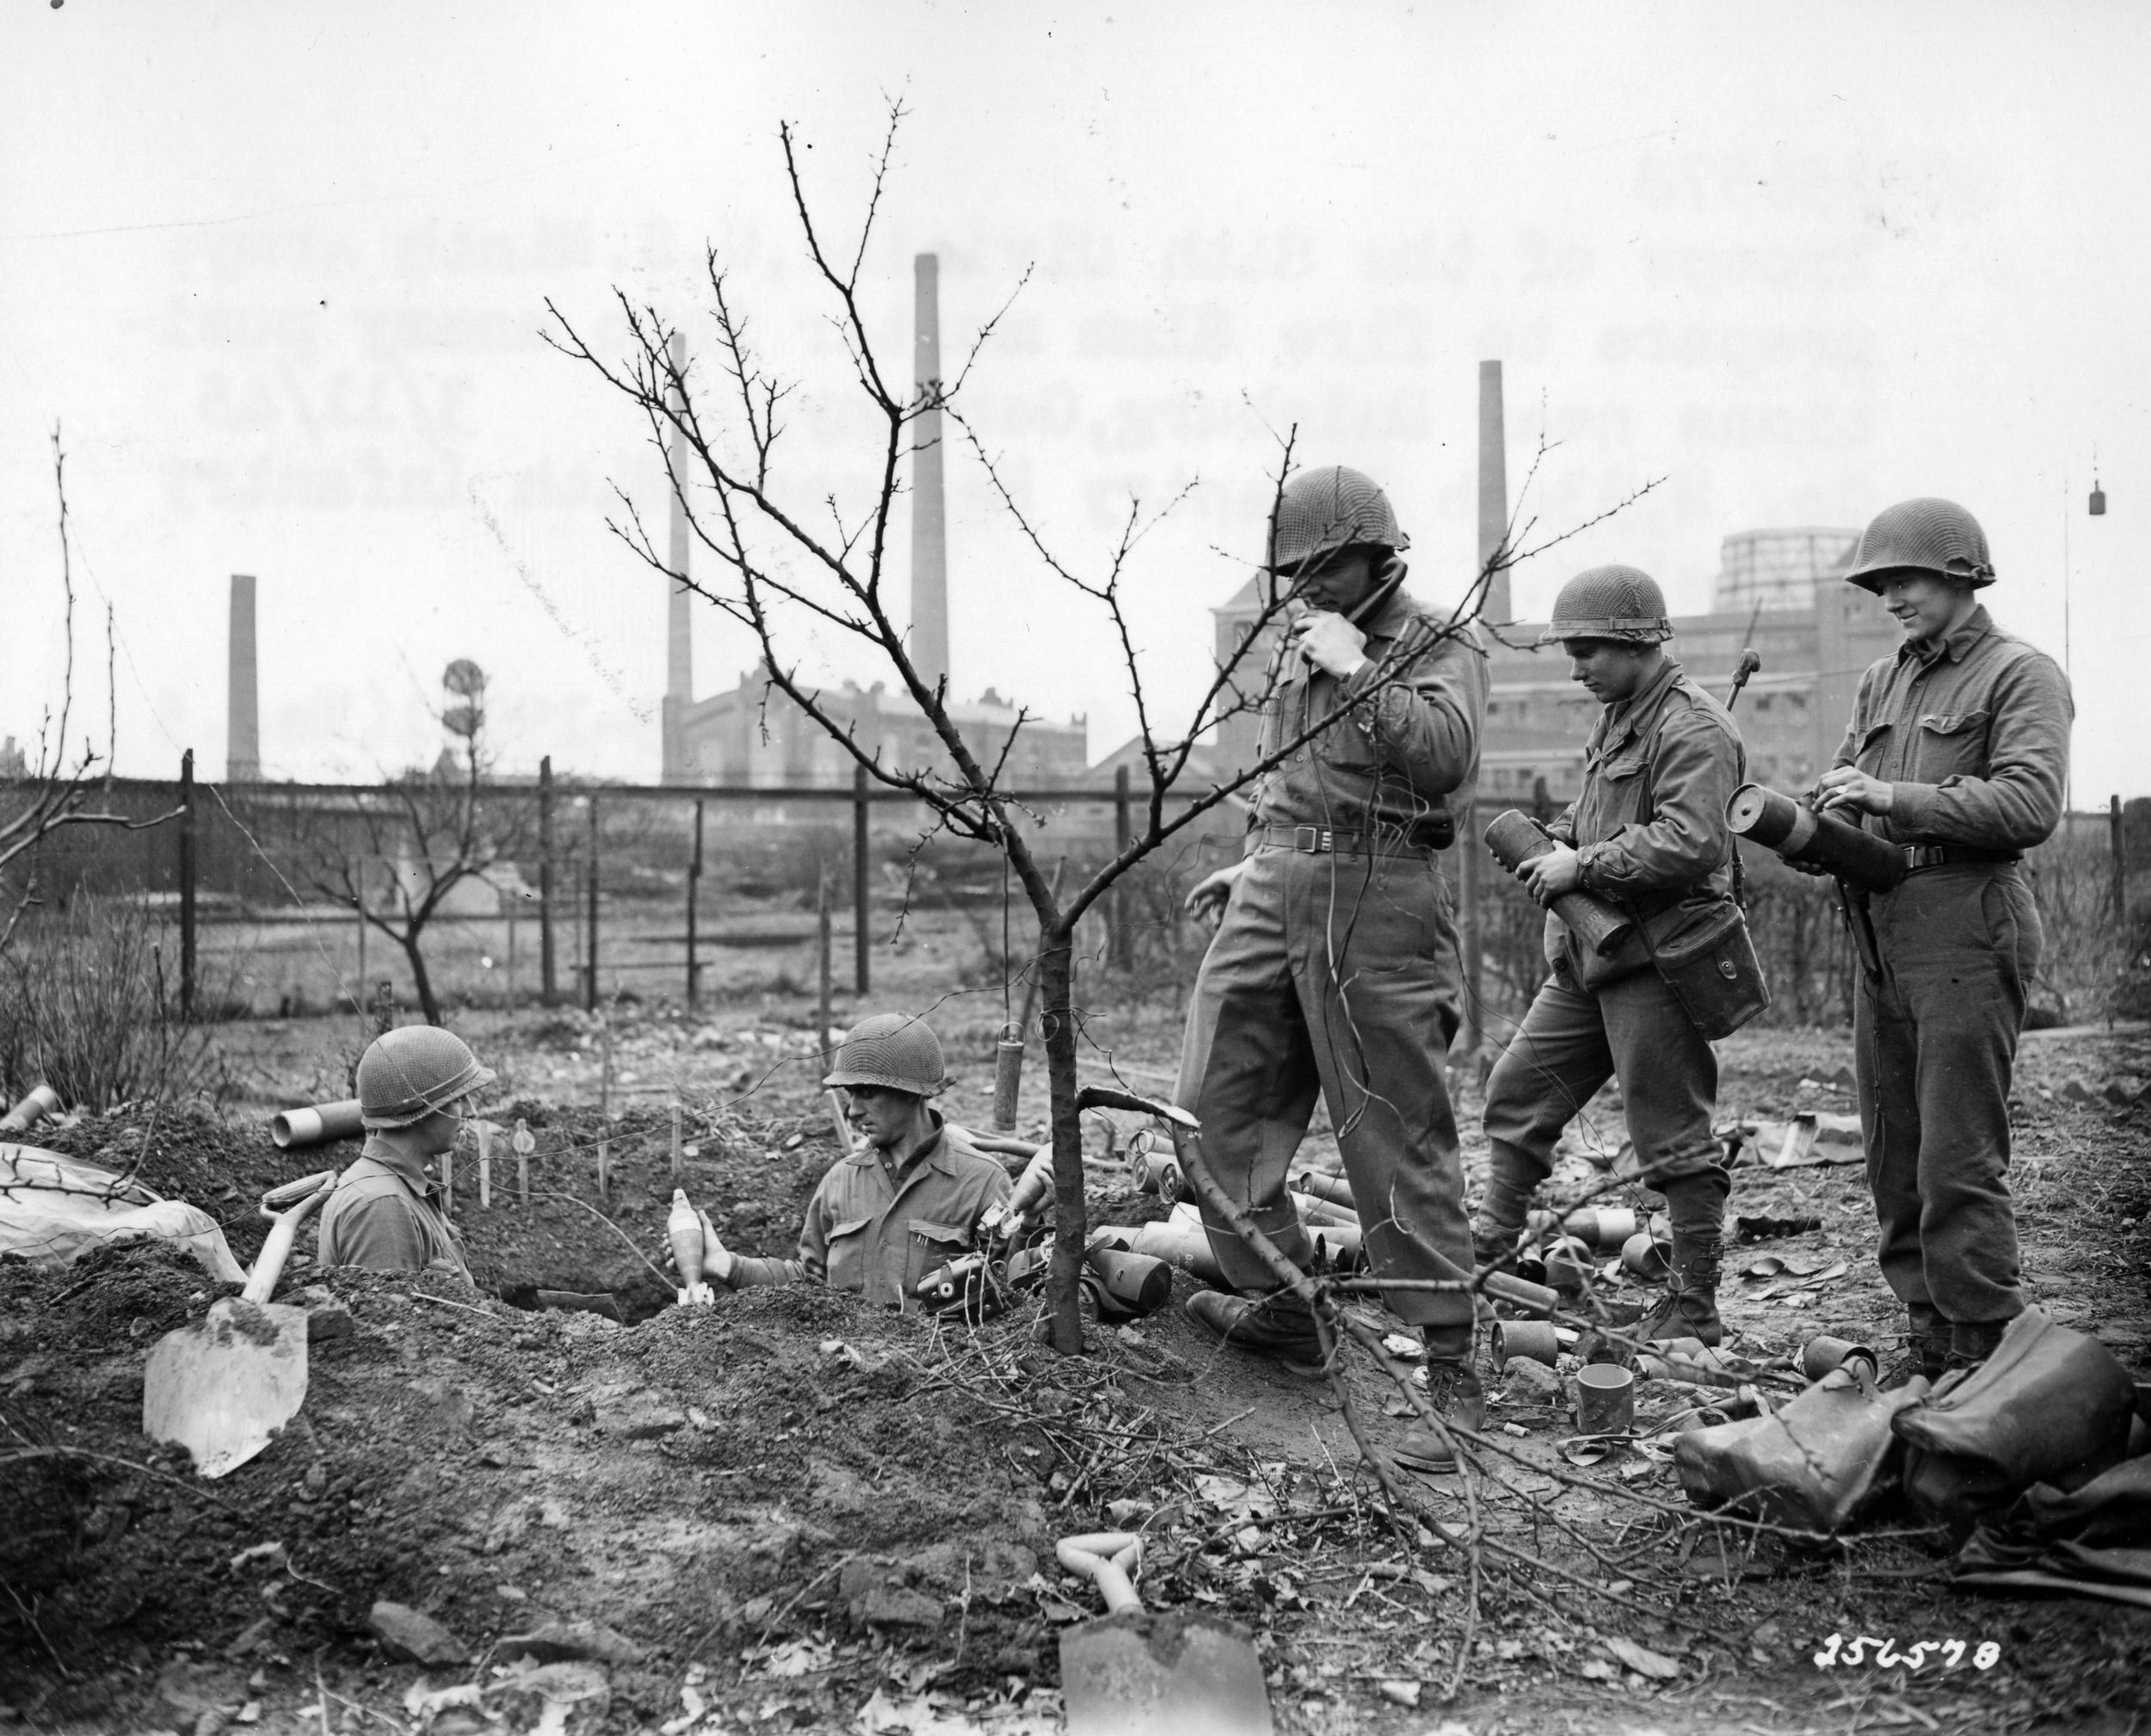  The 81mm mortar proved essential in blasting entrenched German positions during the arduous advance of the U.S. Seventh Army across France. Here, a mortar team prepares to fire its weapon at German troop concentrations.